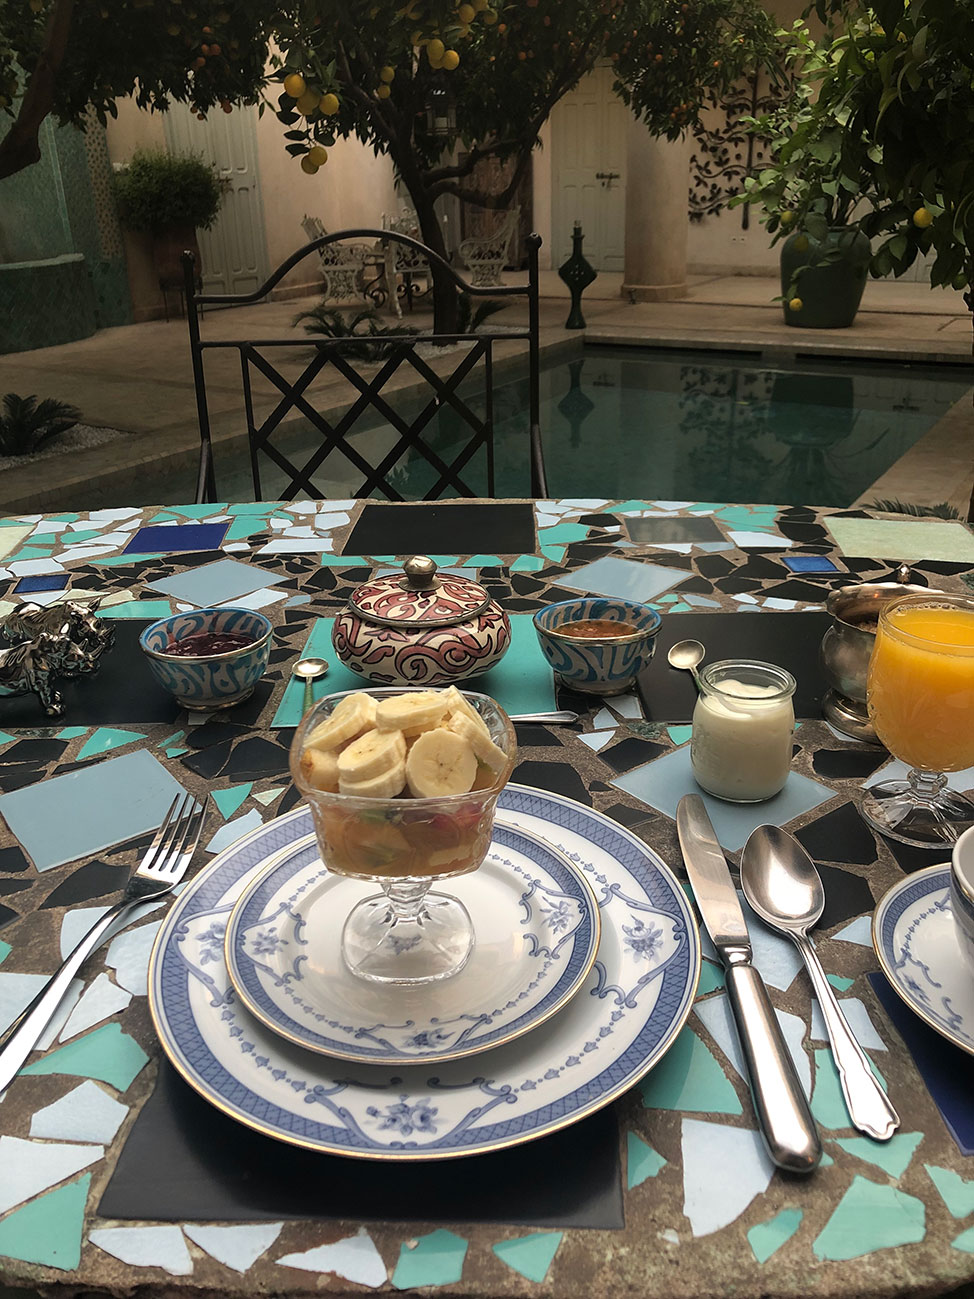 Breakfast place setting on a blue mosaic table overlooking the courtyard's pool.